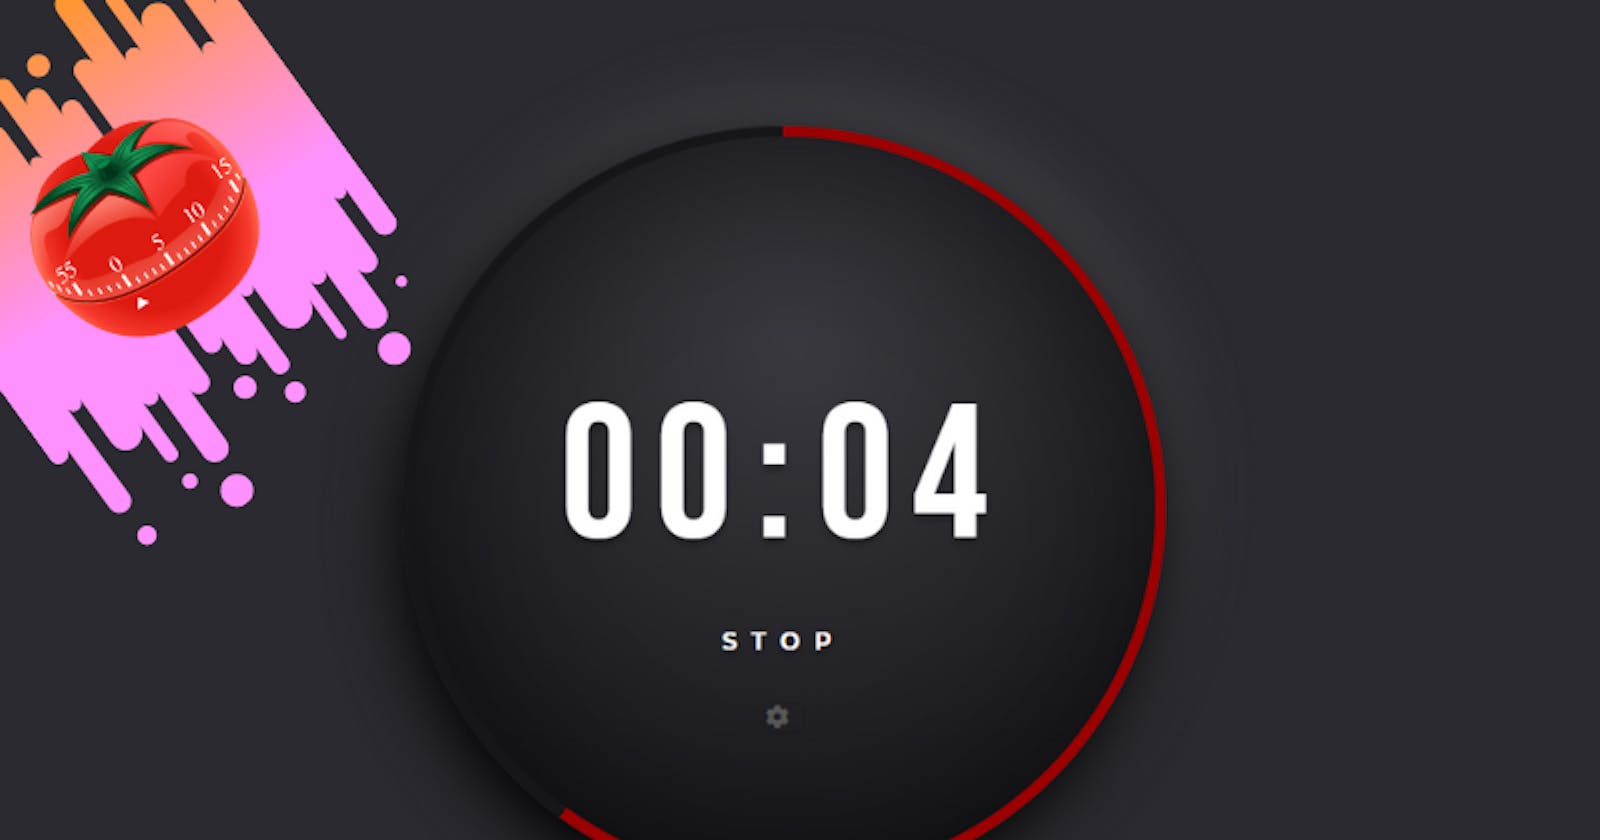 Build a Pomodoro Timer using HTML, CSS and Javascript